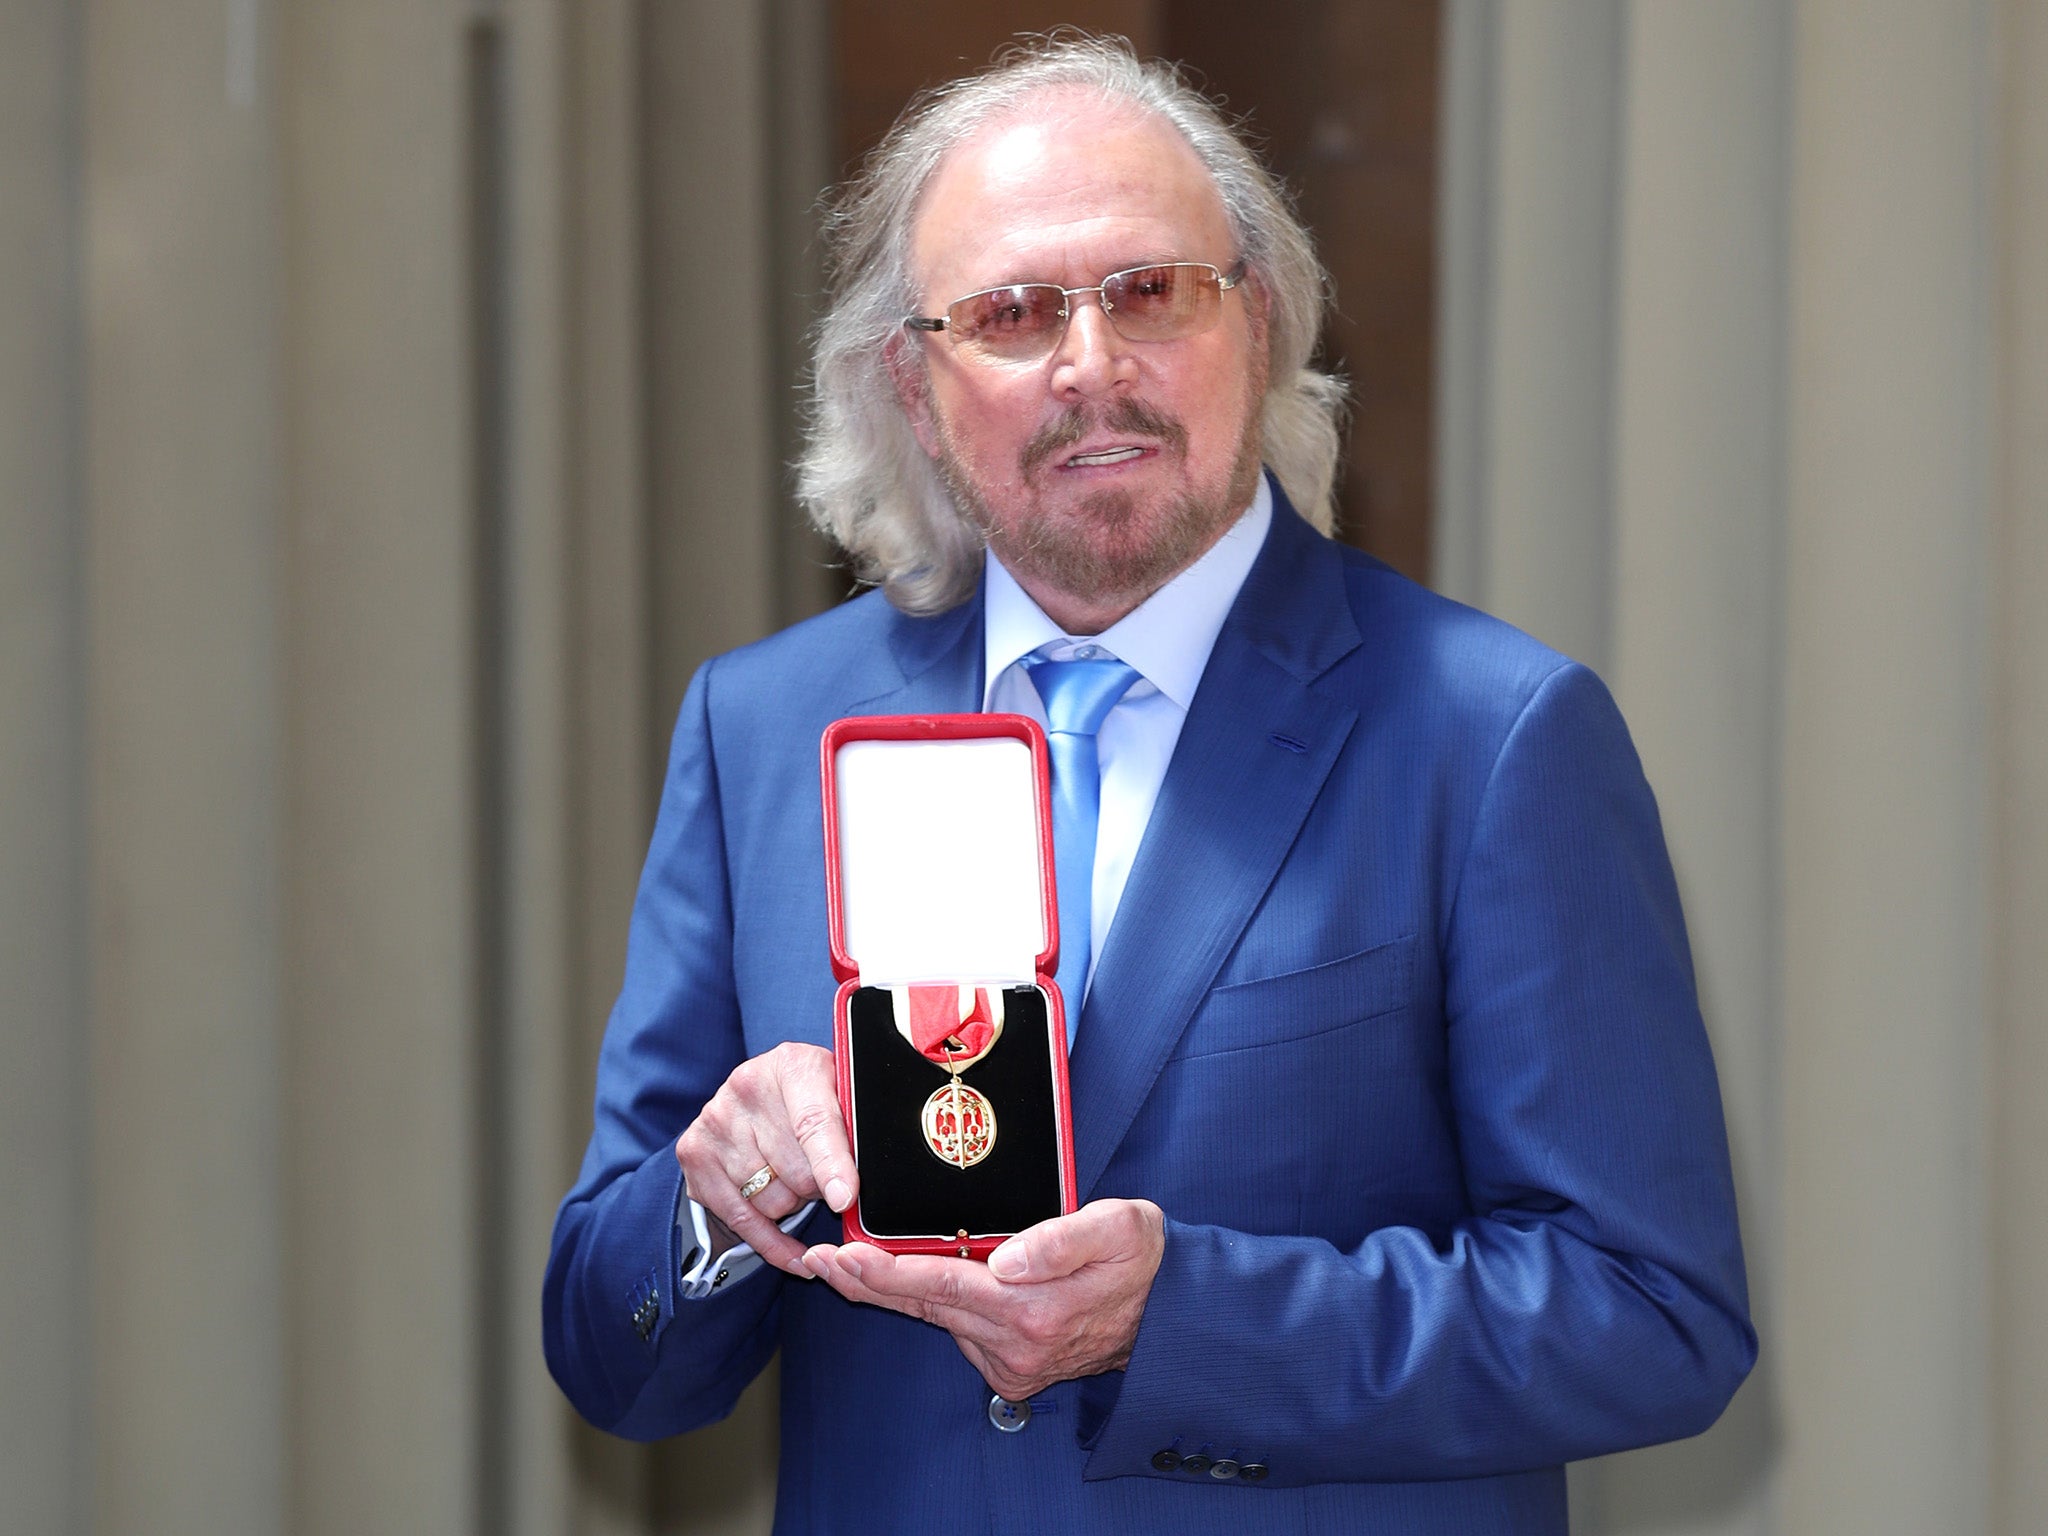 Sir Barry Gibb Knighted At Buckingham Palace By Prince Charles If It Were Not For My Brothers I Would Not Be Here The Independent The Independent